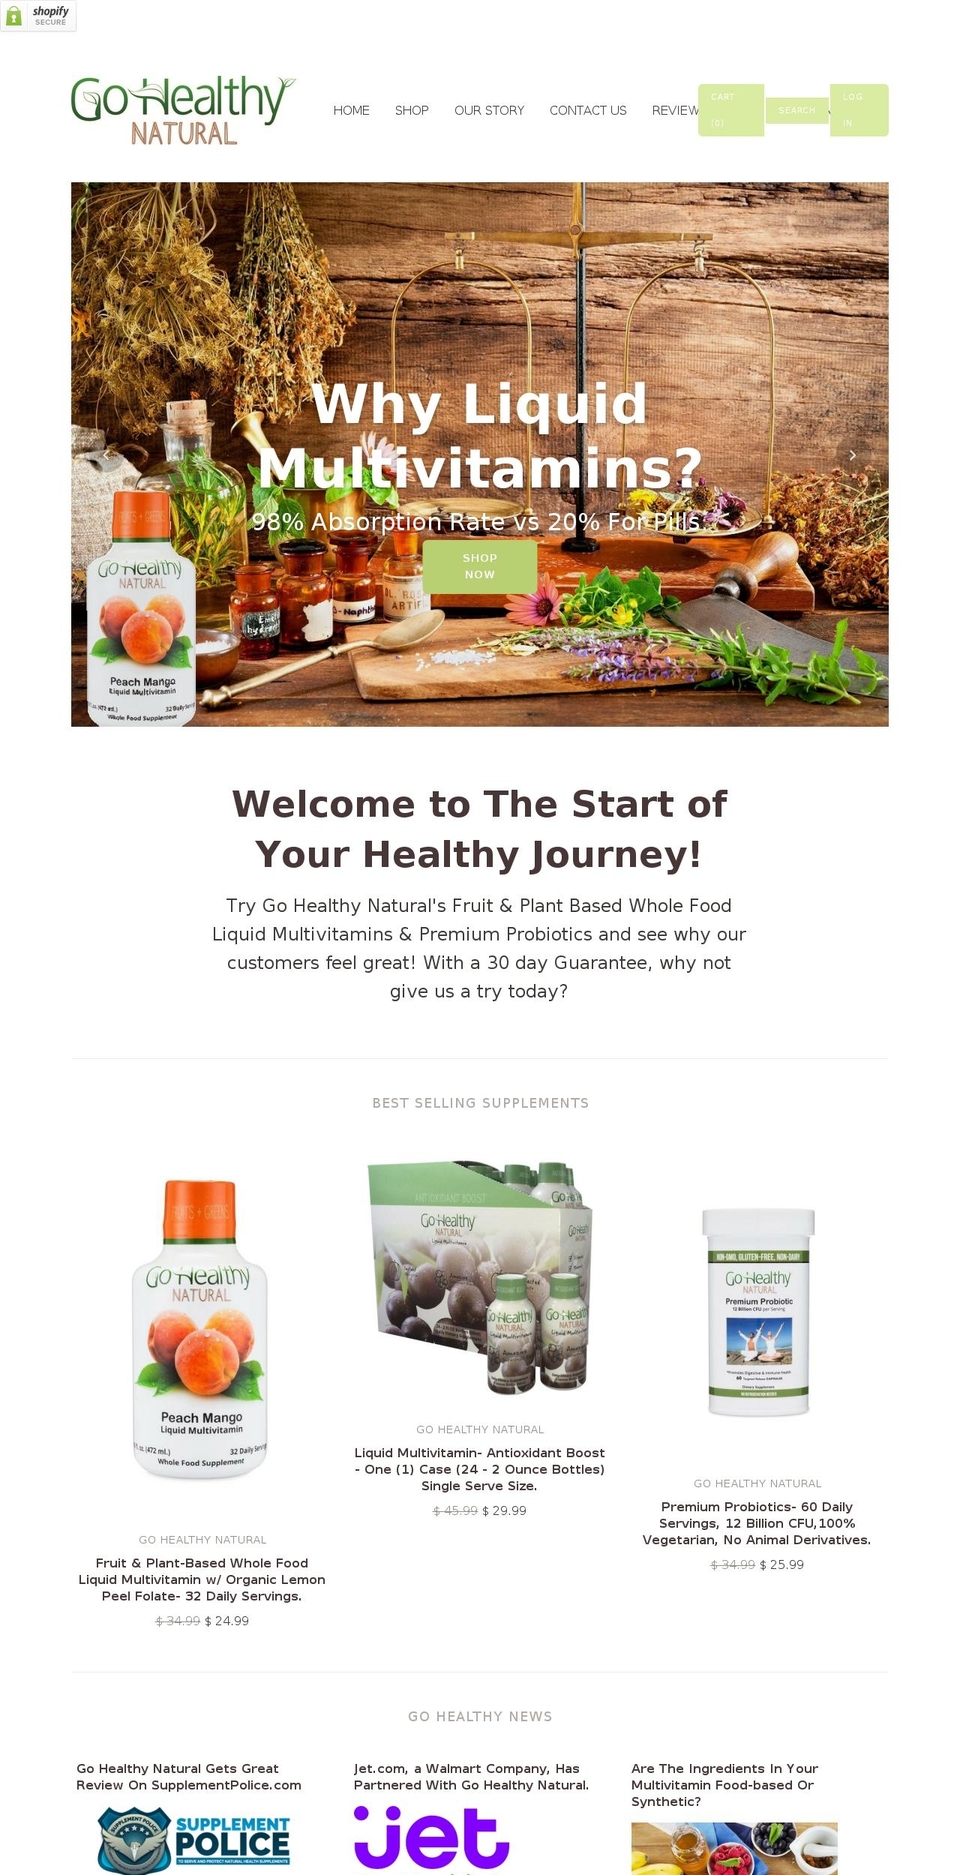 Cypress Shopify theme site example gohealthynatural.com